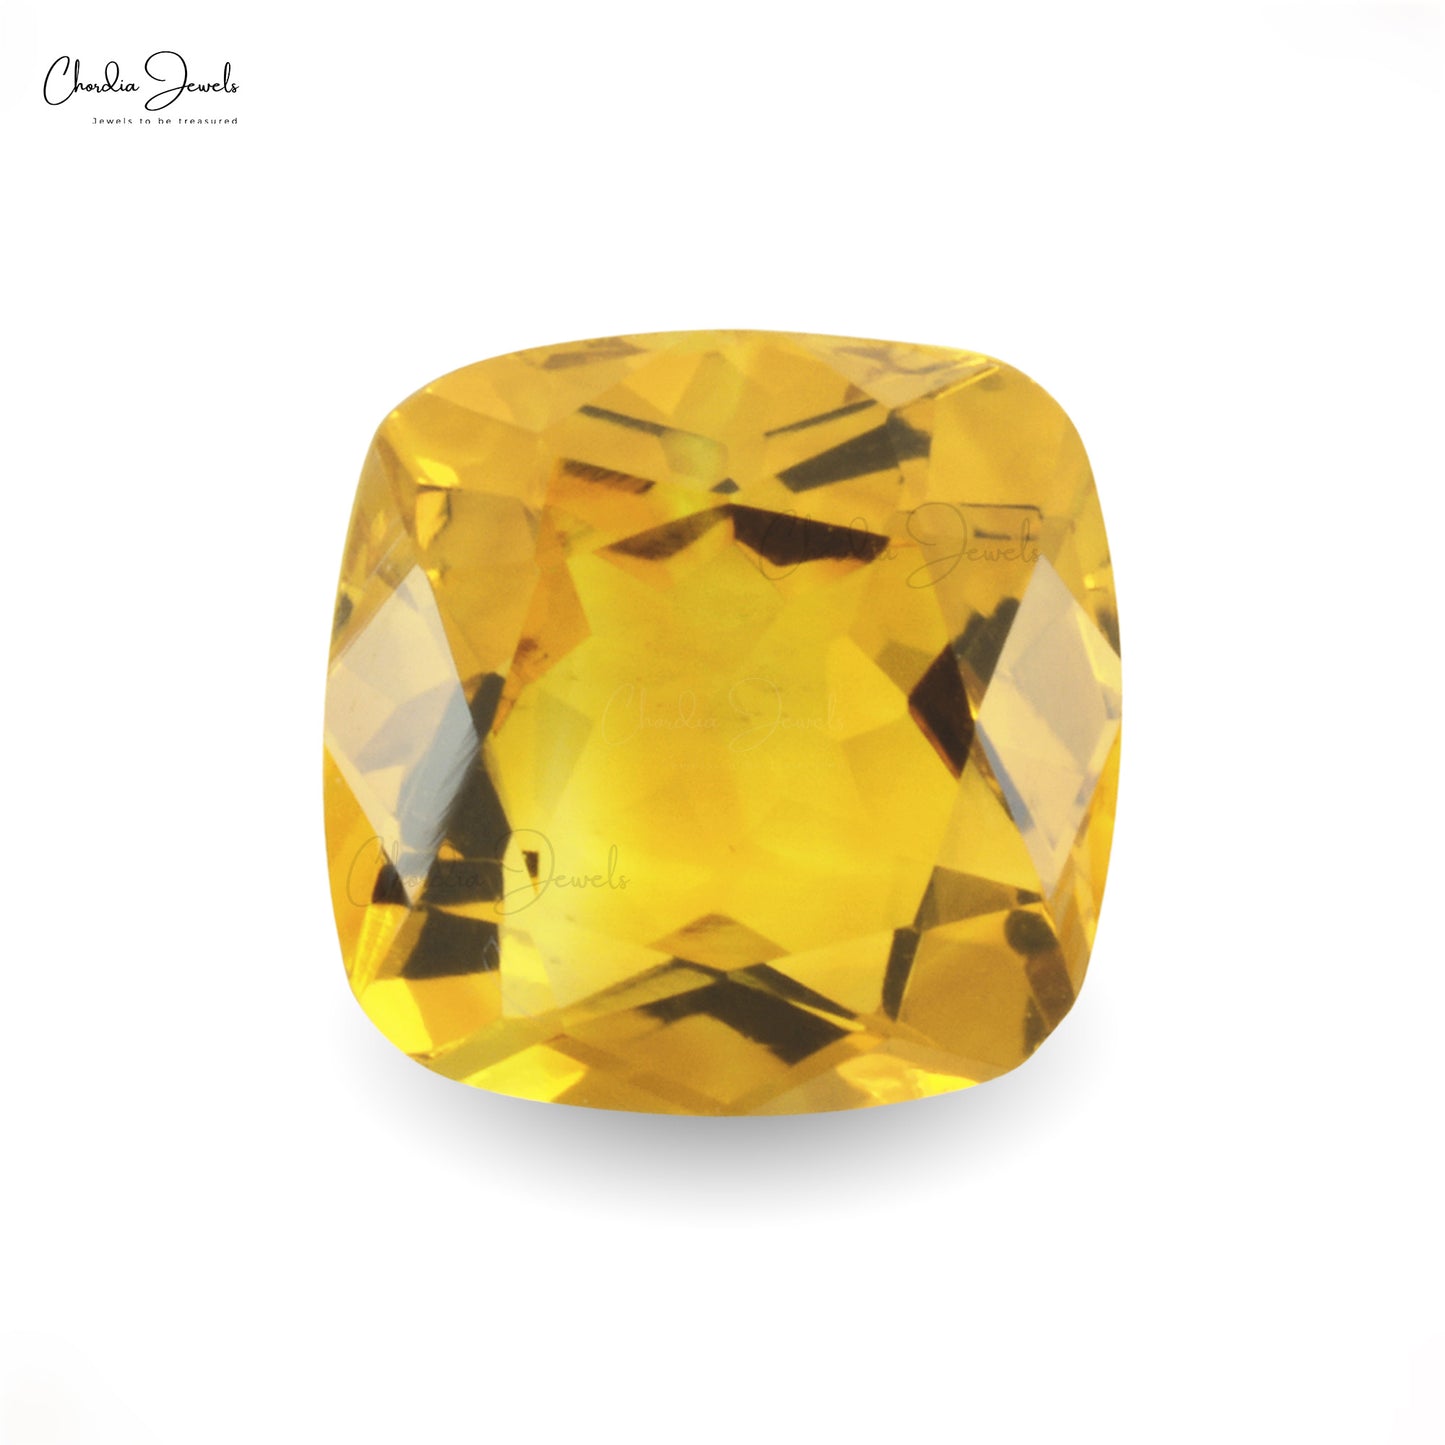 Grade AAA 9MM Natural Citrine Cut Loose Gemstone at Wholesale from India, 1 Piece